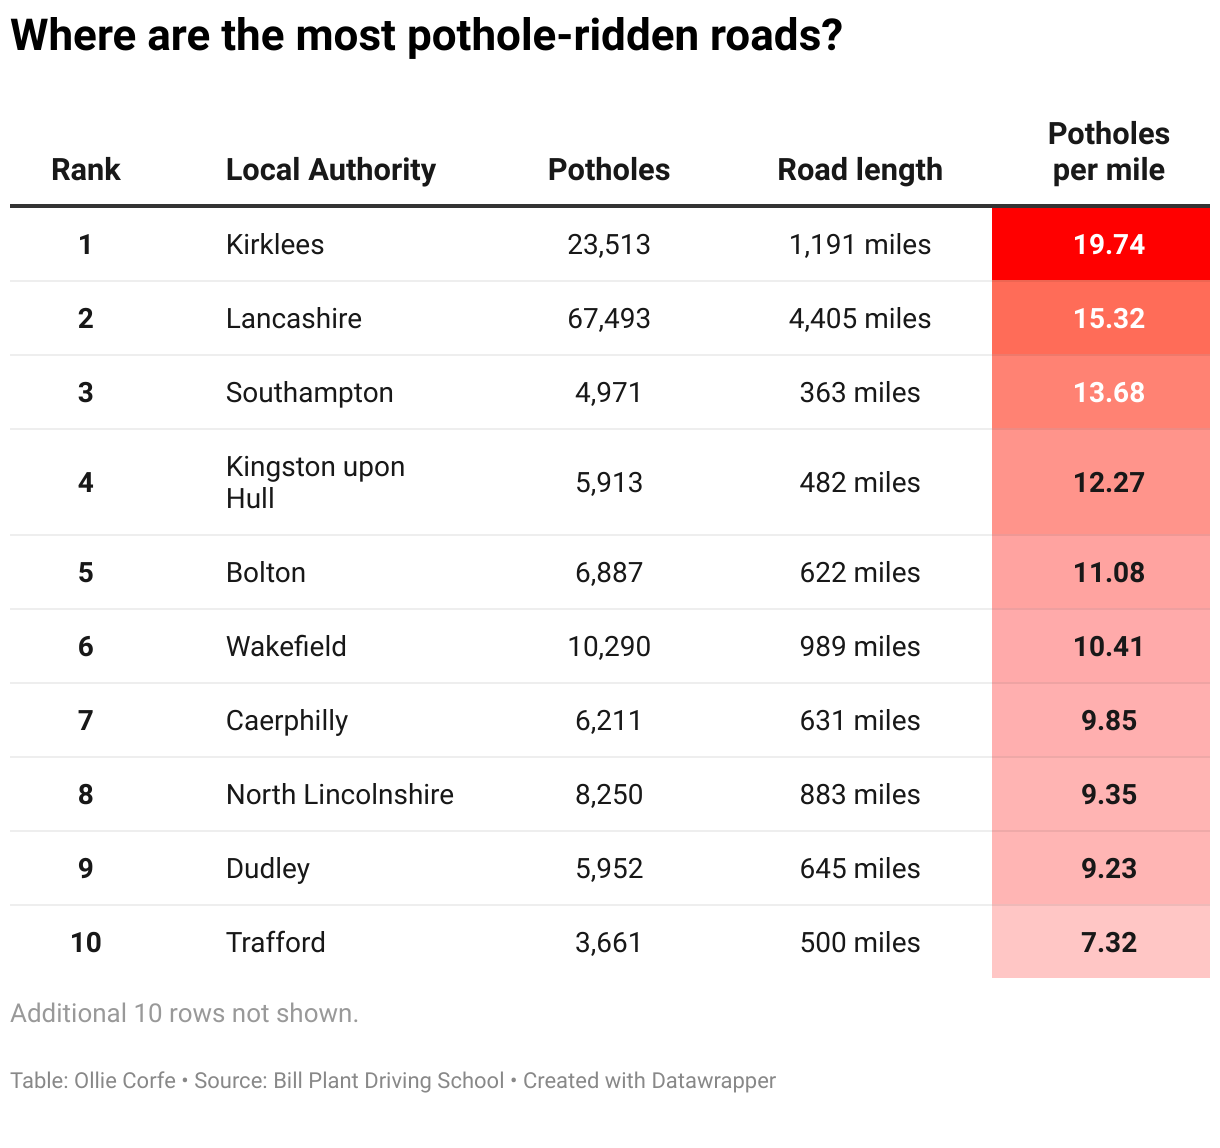 Table of potholes per local authority.